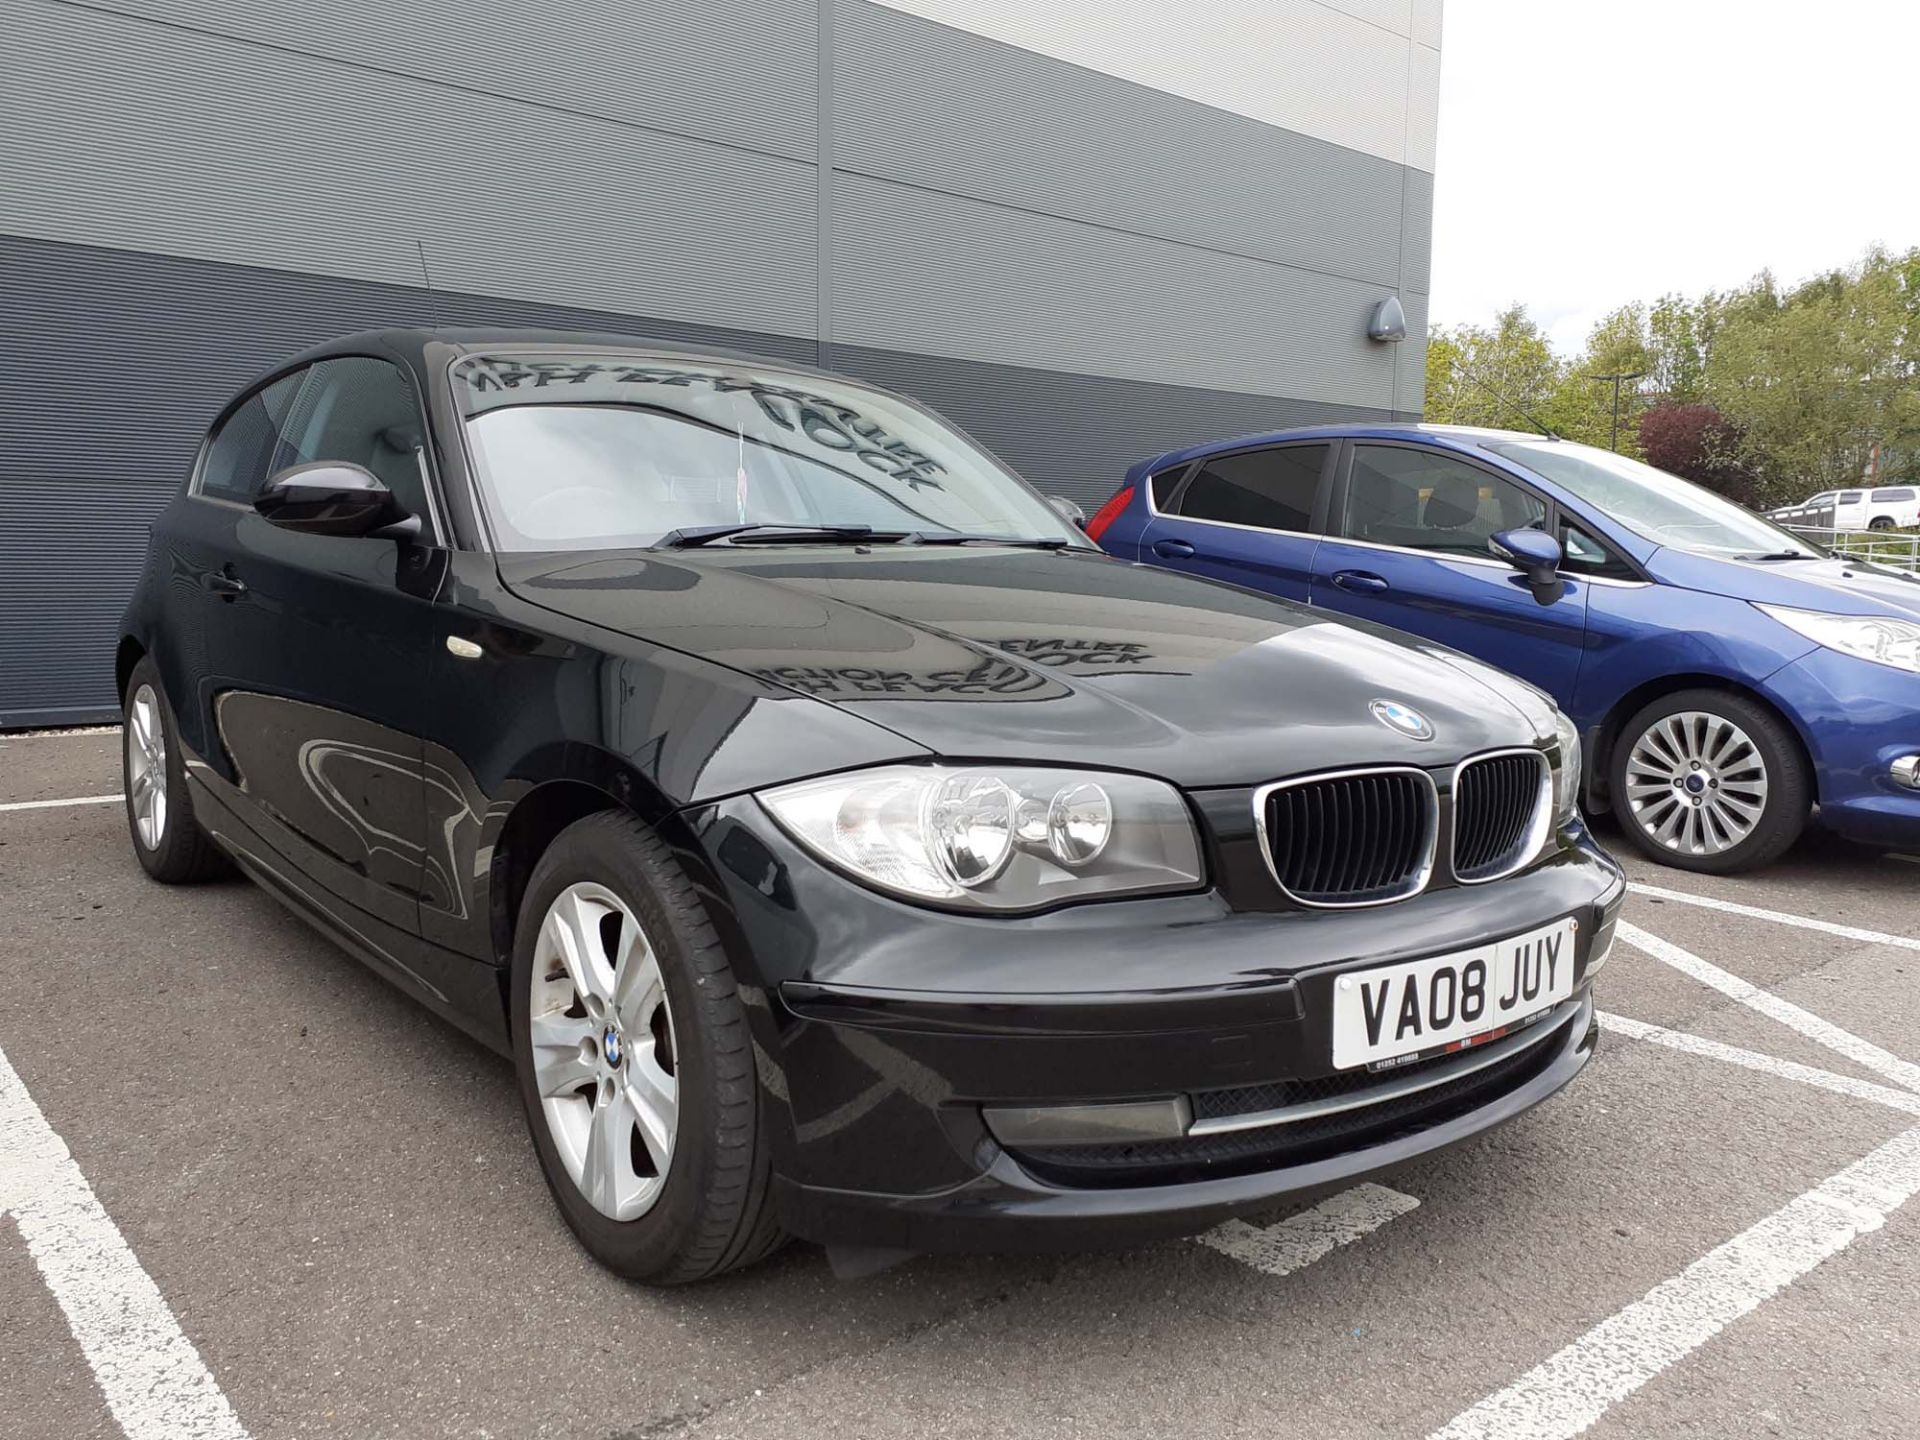 BMW 1161SE in black, registration VA08 JUY, 1600cc, petrol, with receipts and old MOT's, No V5